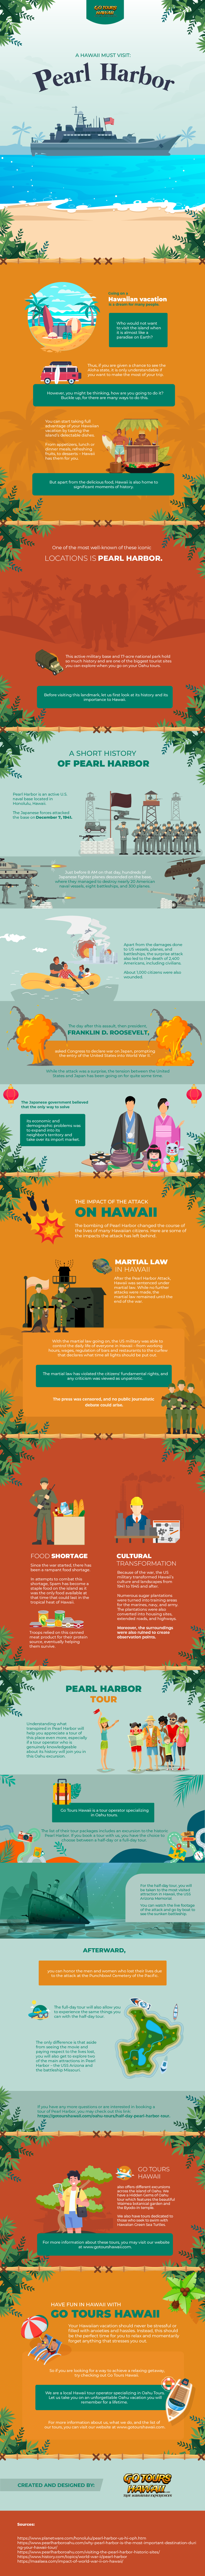 A-Hawaii-Must-Visit-Pearl-Harbor-infographic-image-HDN523